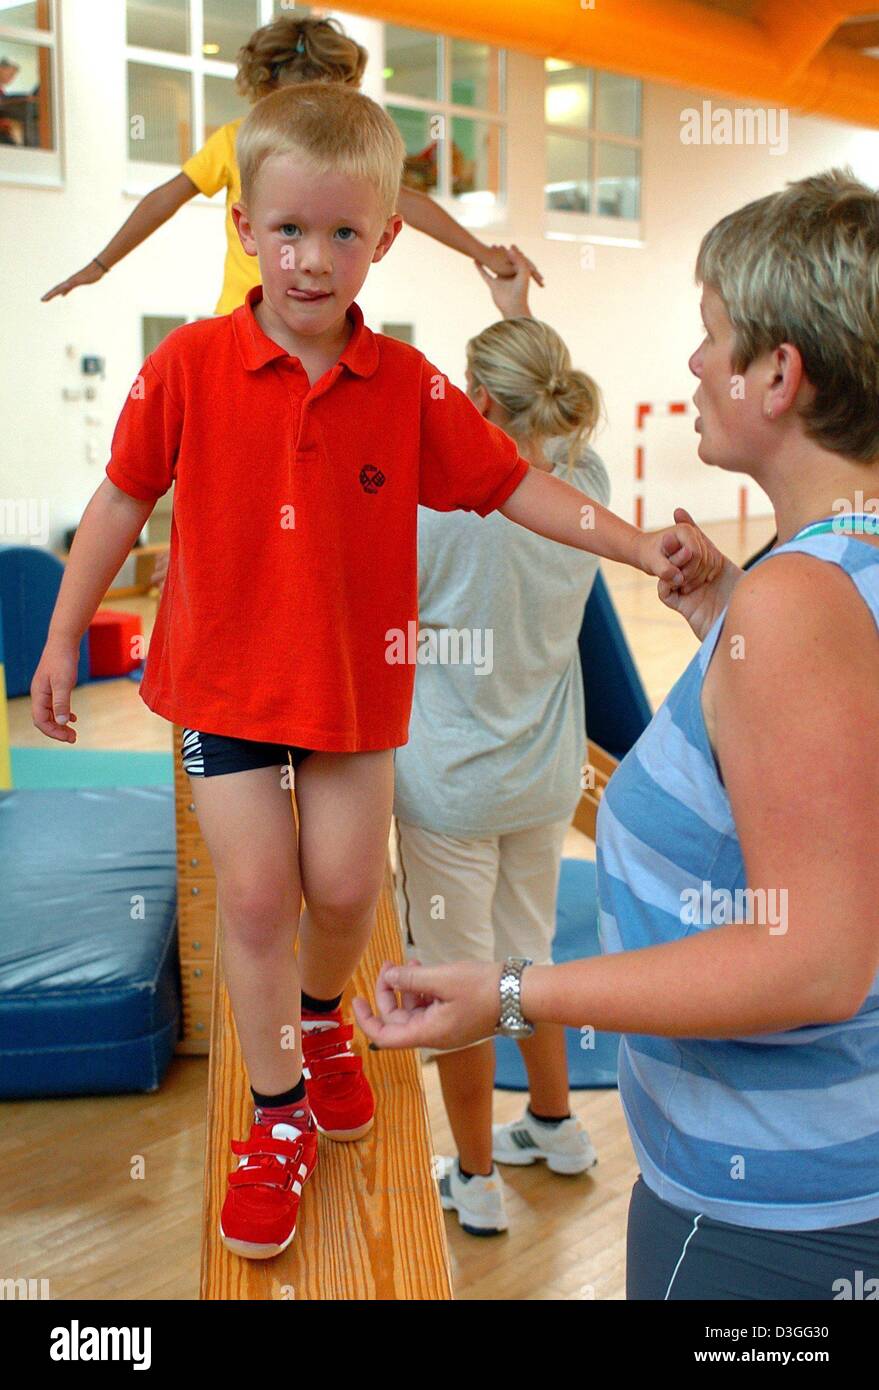 (dpa) - Birgit Niebuhr assists her son Tobias to balance on a bench in the gym of the Sanitas mother-child clinic at the health resort of Boltenhagen, Germany, 13 August 2004. The children are mainly treated for respiratory infections, skin diseases as well as psychosomatic illnesses. Stock Photo